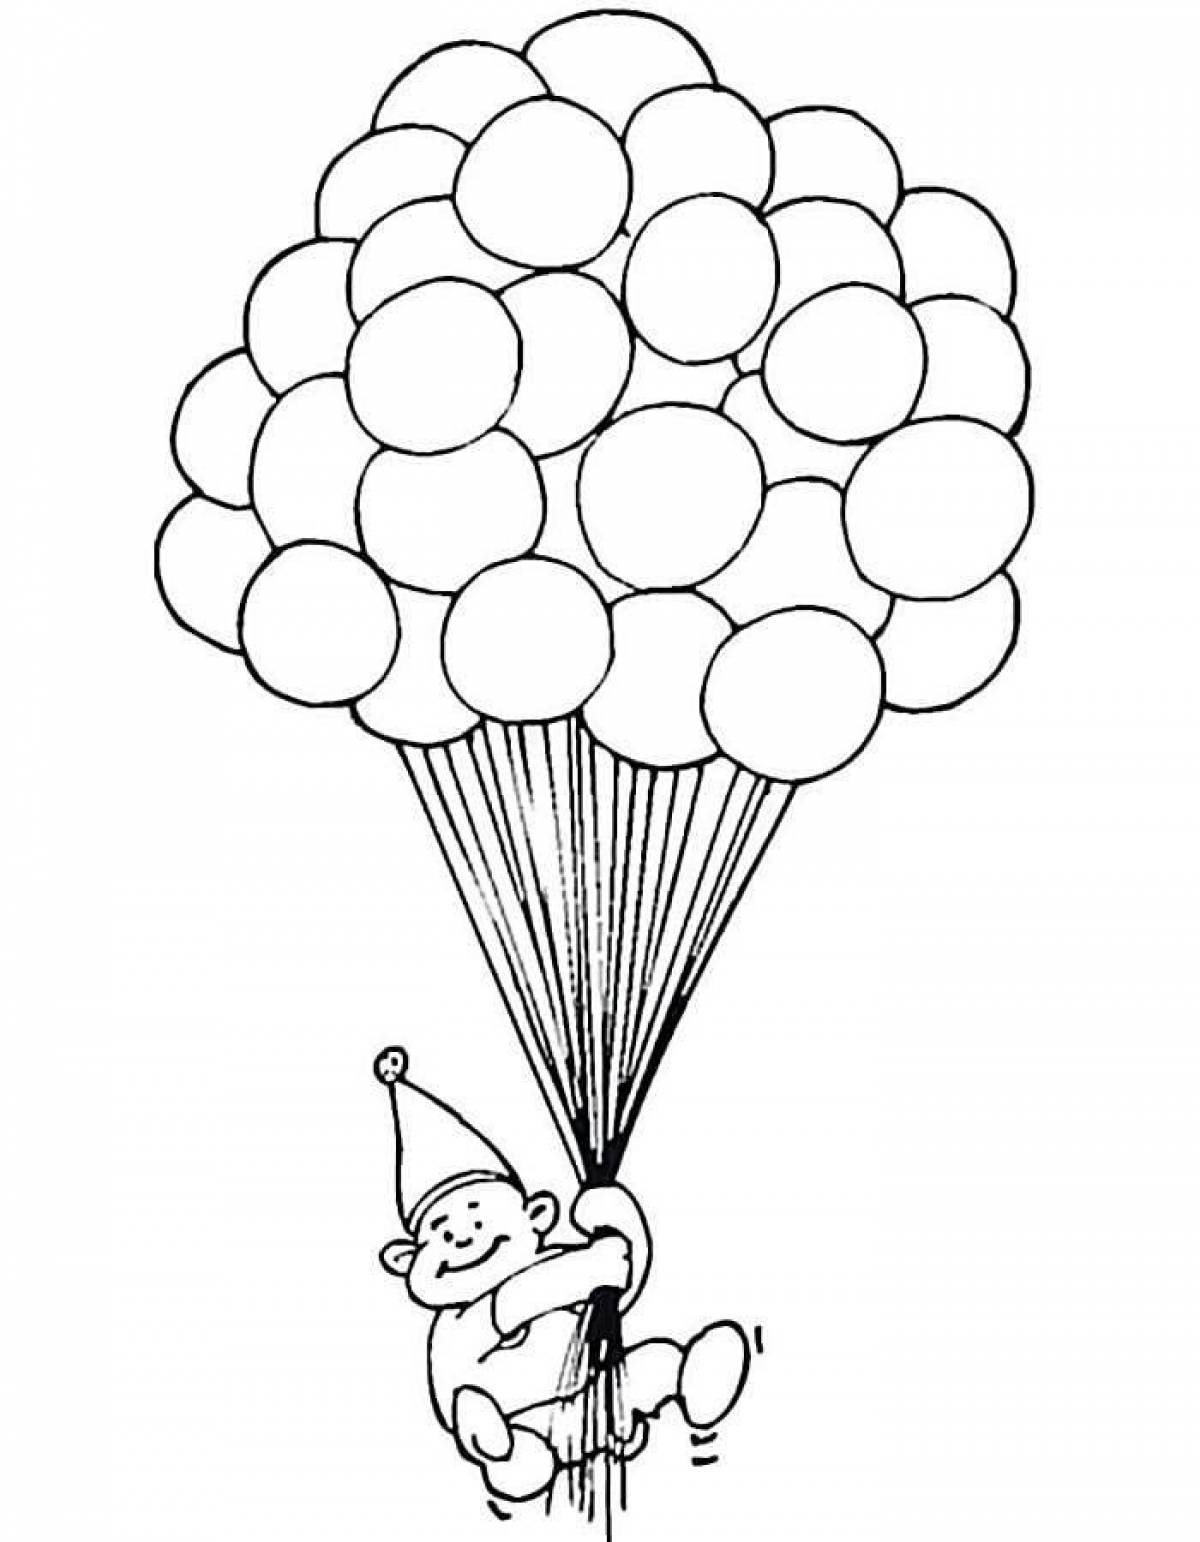 Colorful balloons coloring book